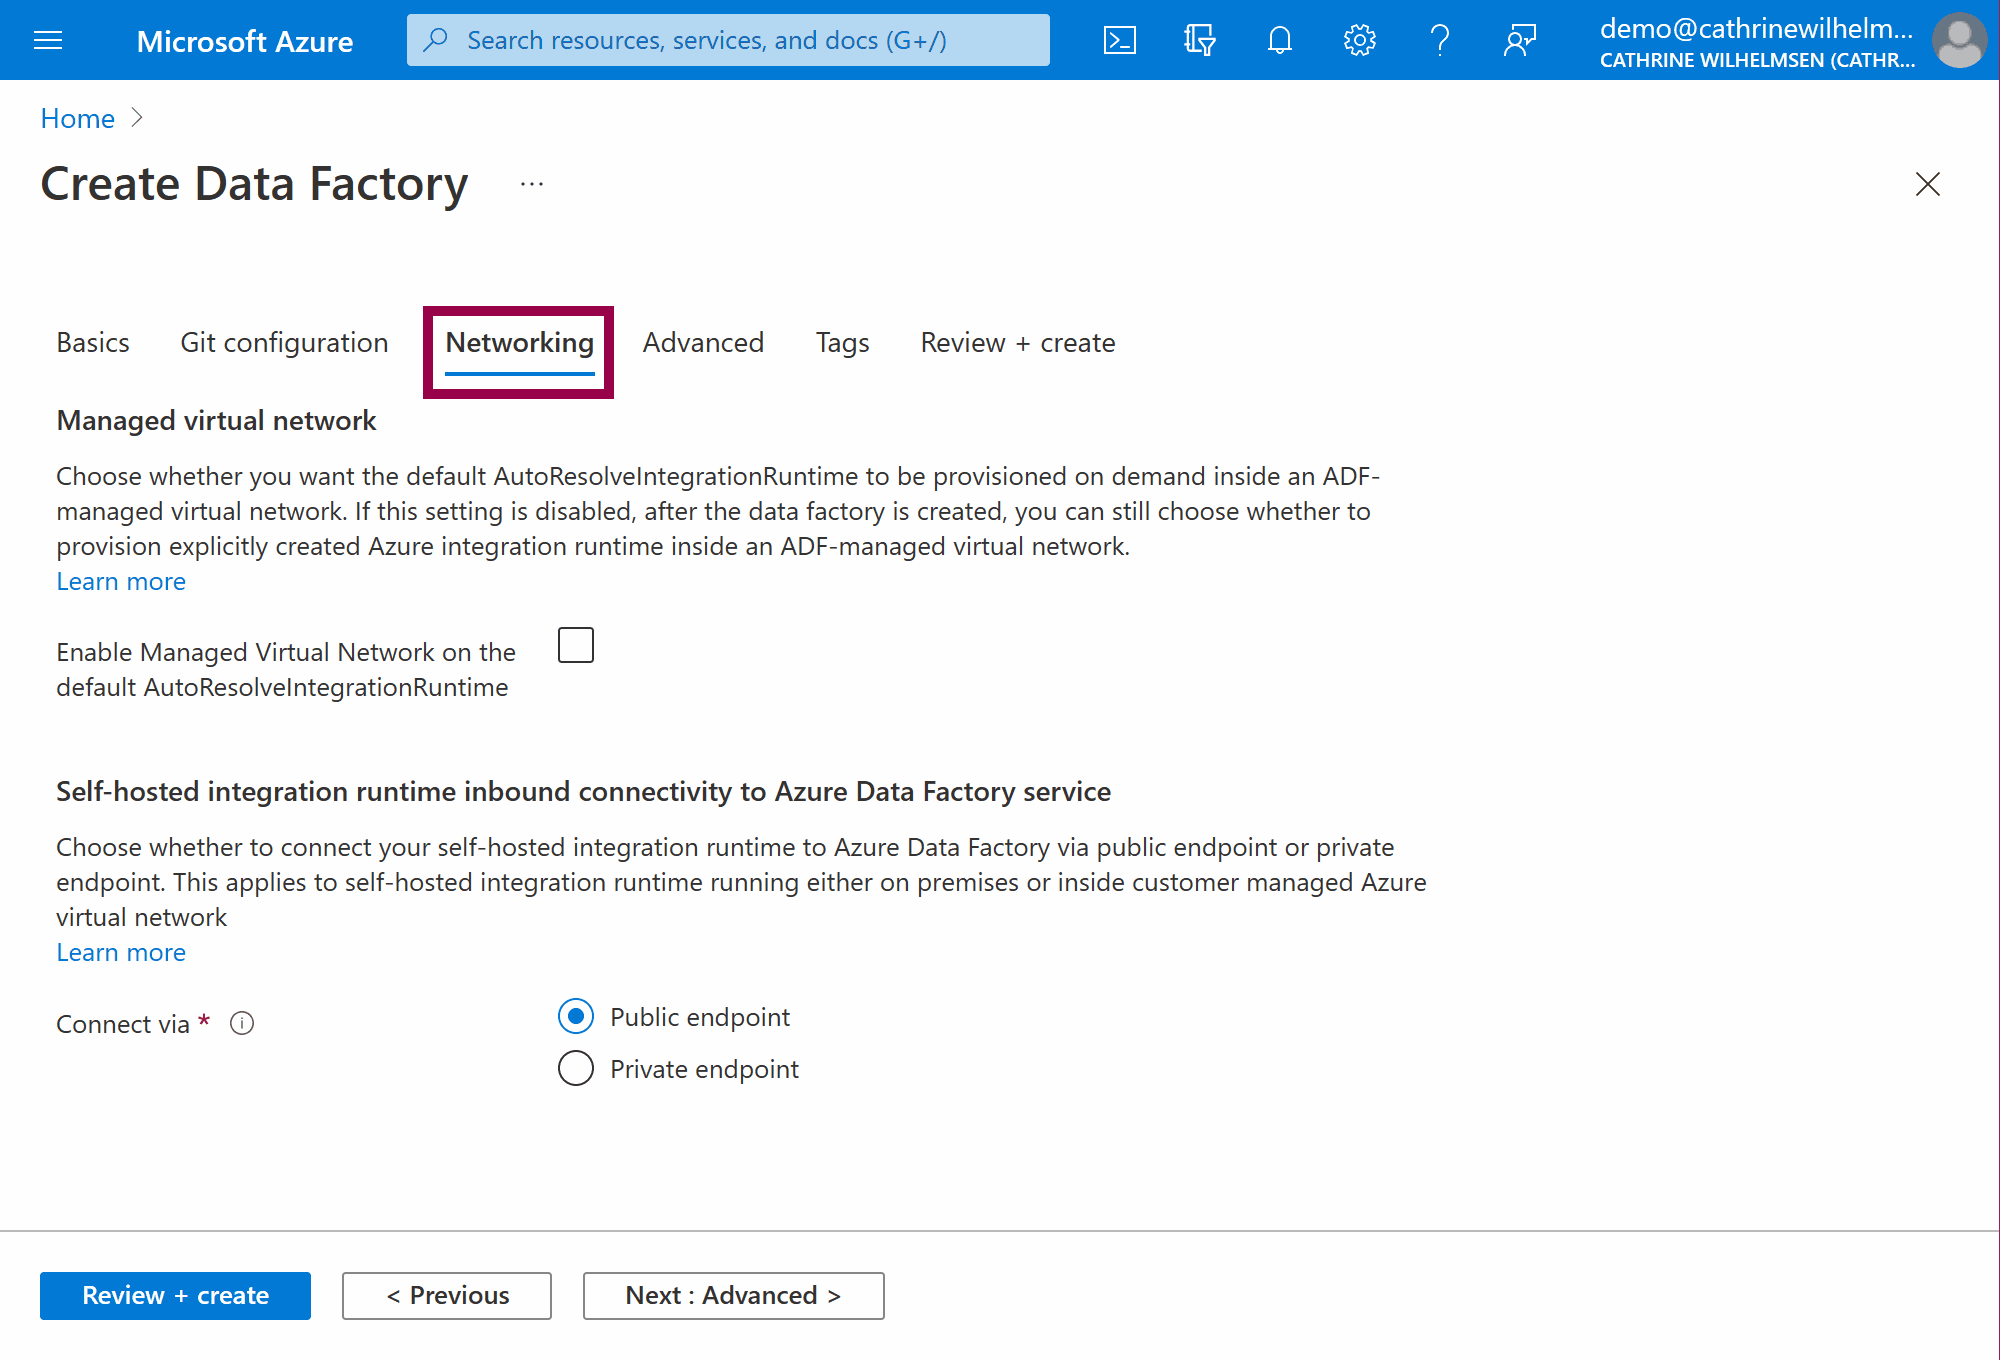 Screenshot of the Create Data Factory: Networking page in the Azure Portal